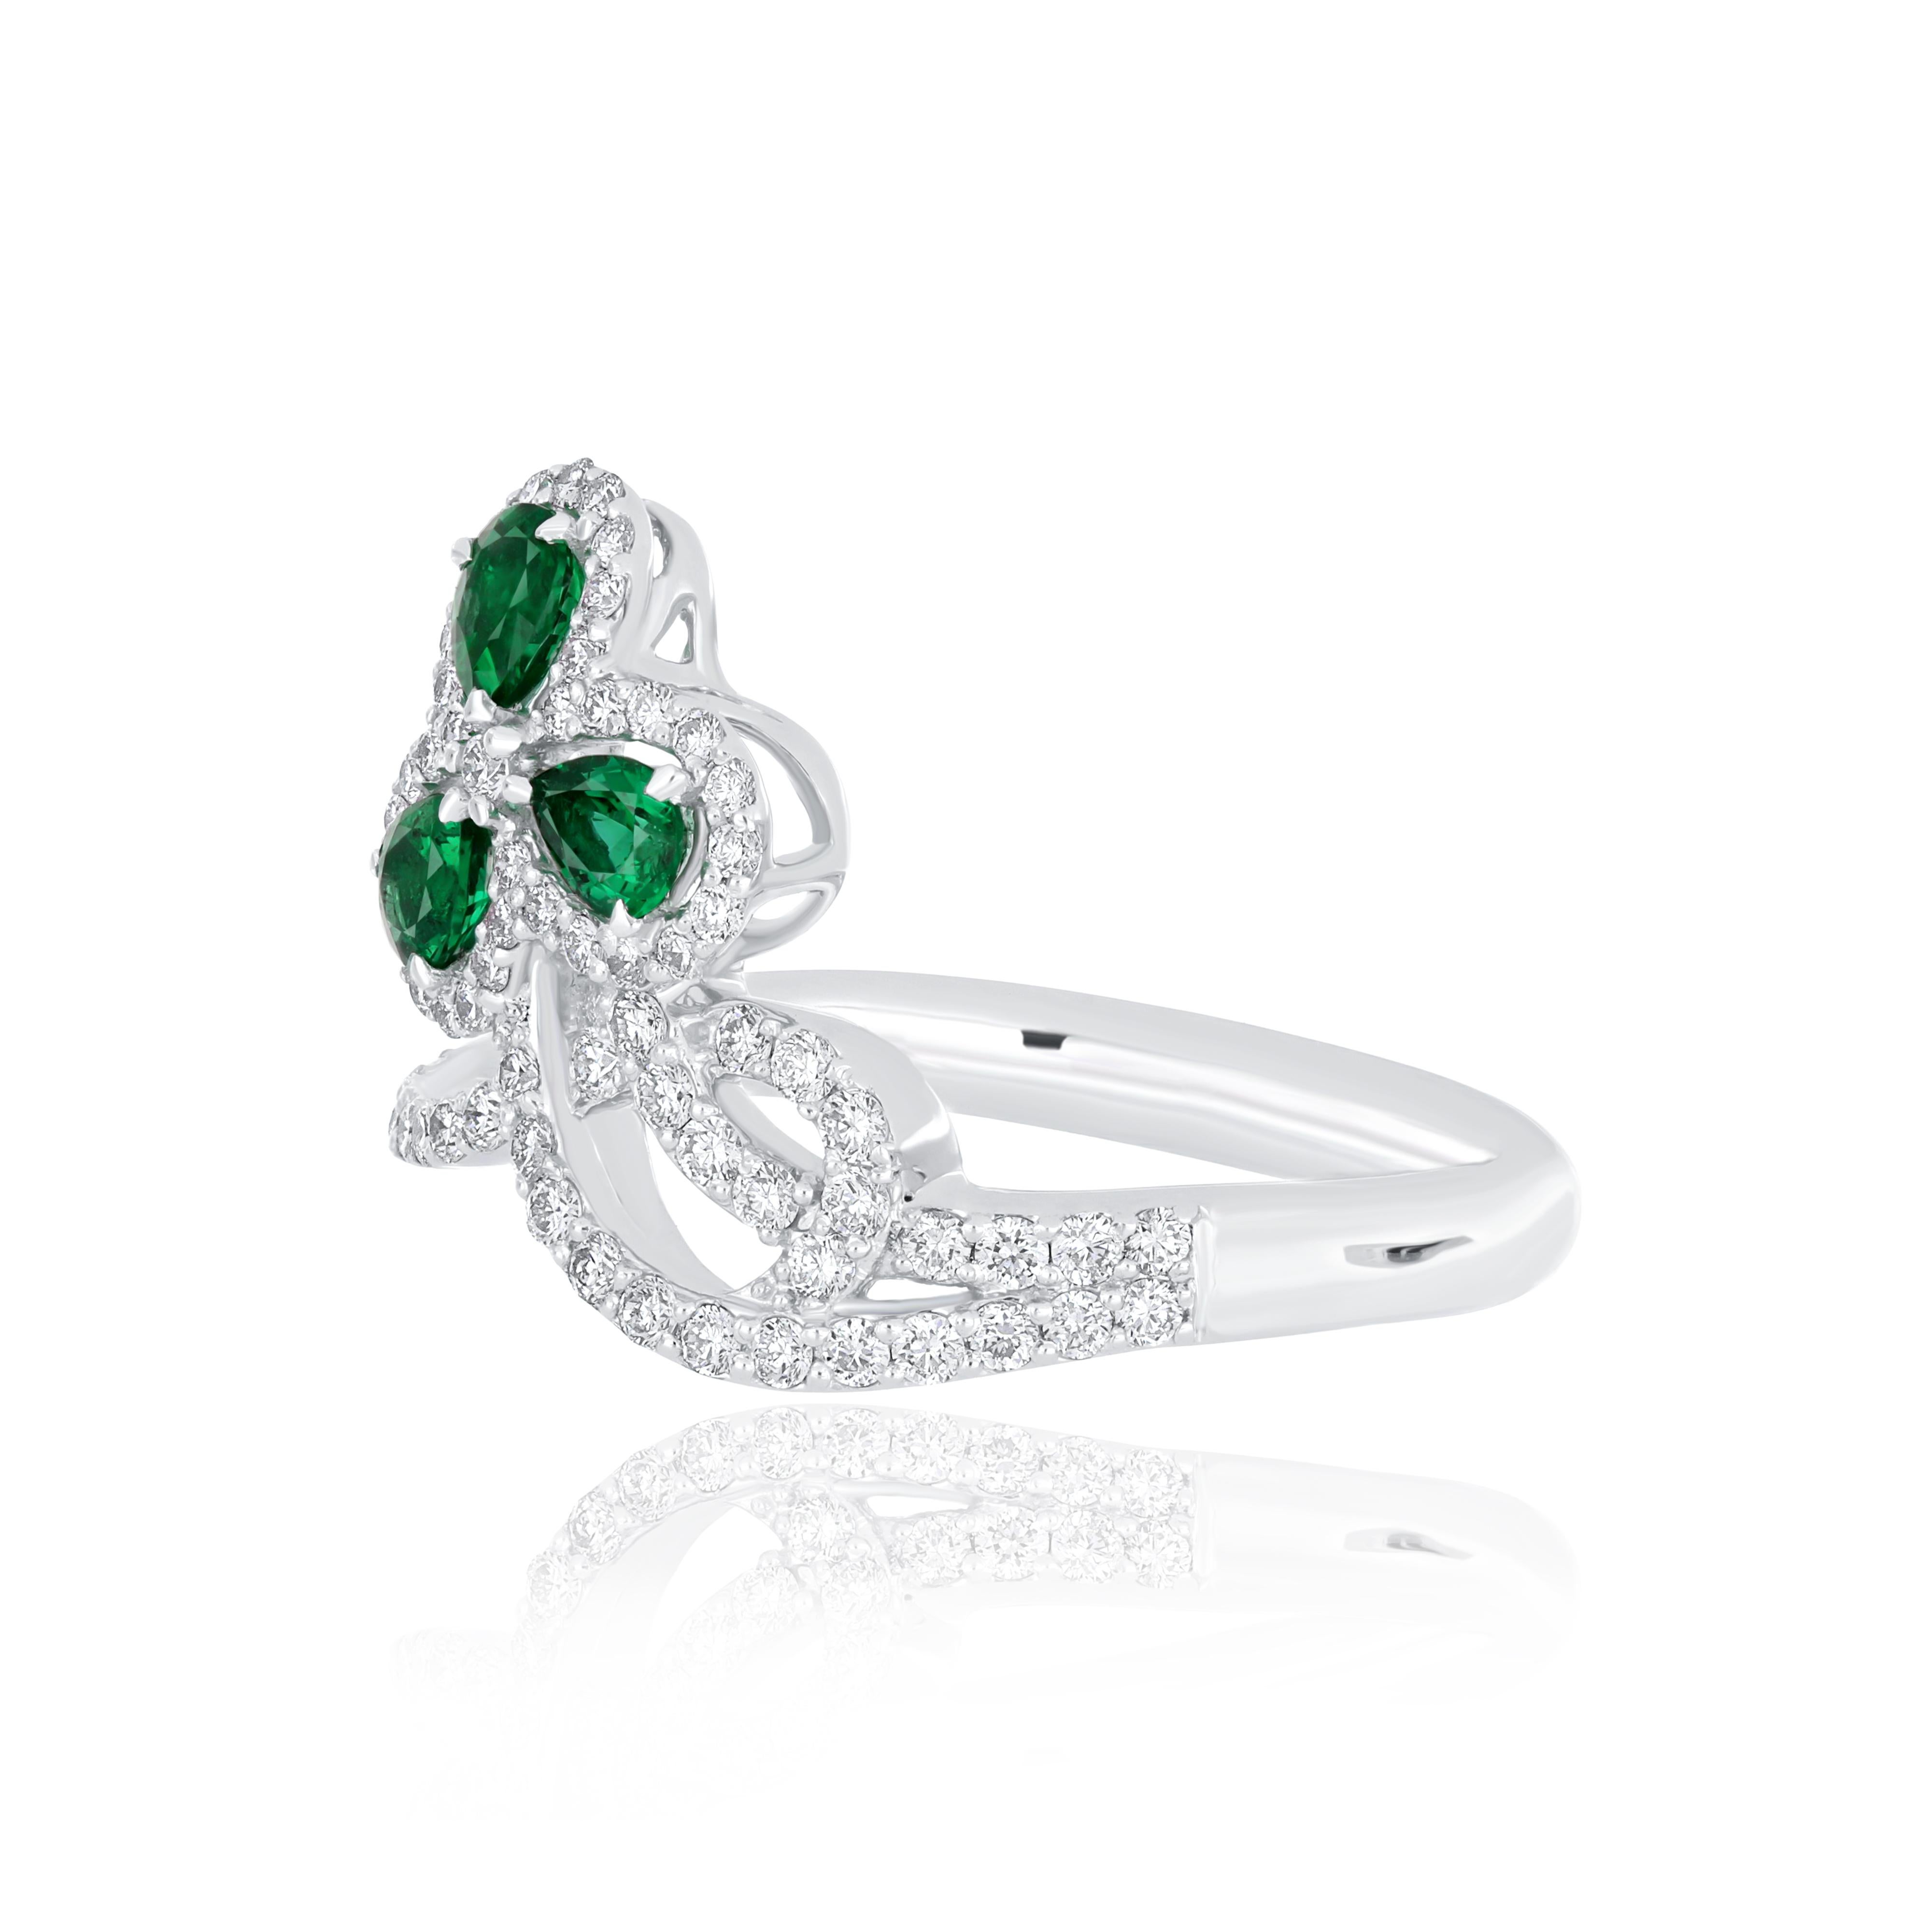 For Sale:  Emerald and Diamond Studded Ring 18 Karat White Gold jewelry handcraft Ring 3